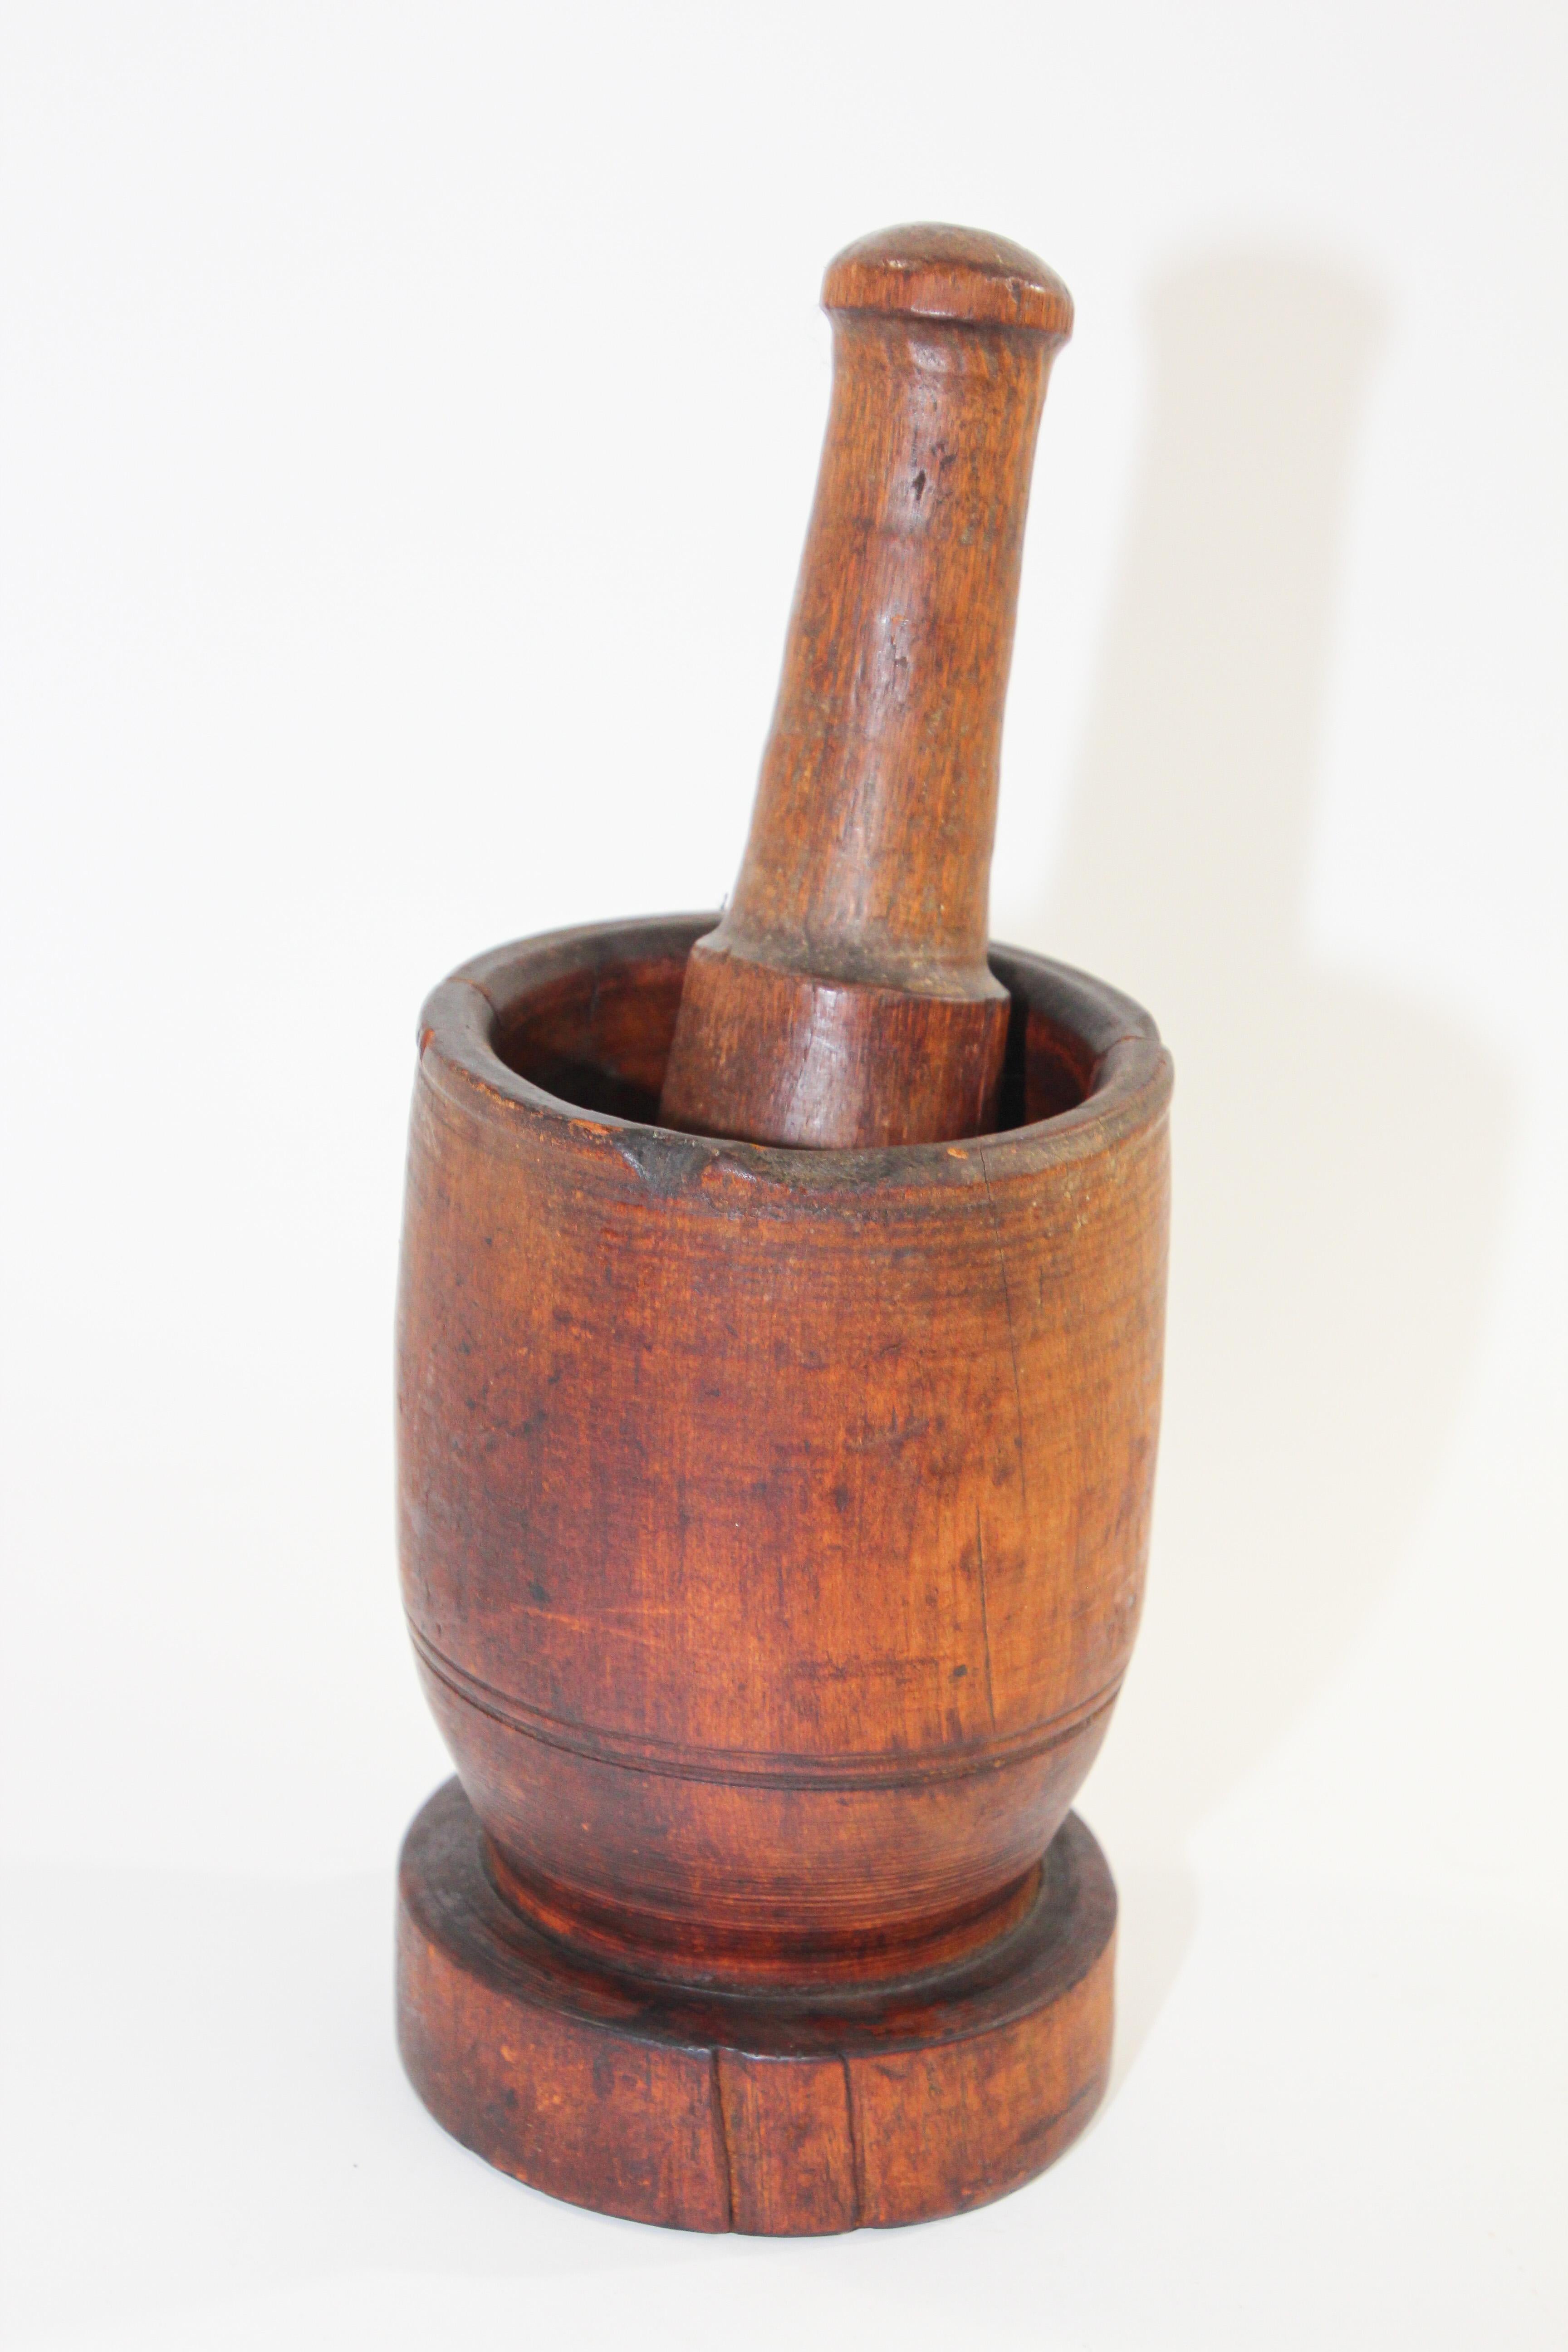 Large wood antique American mortar and pestle.
Early 19th c. Americana turned wood footed mortar and pestle.
American, late 19th century wooden mortar and pestle.
The urn shaped mortar with rich patina has a wonderful warmth and feel.
Both pieces